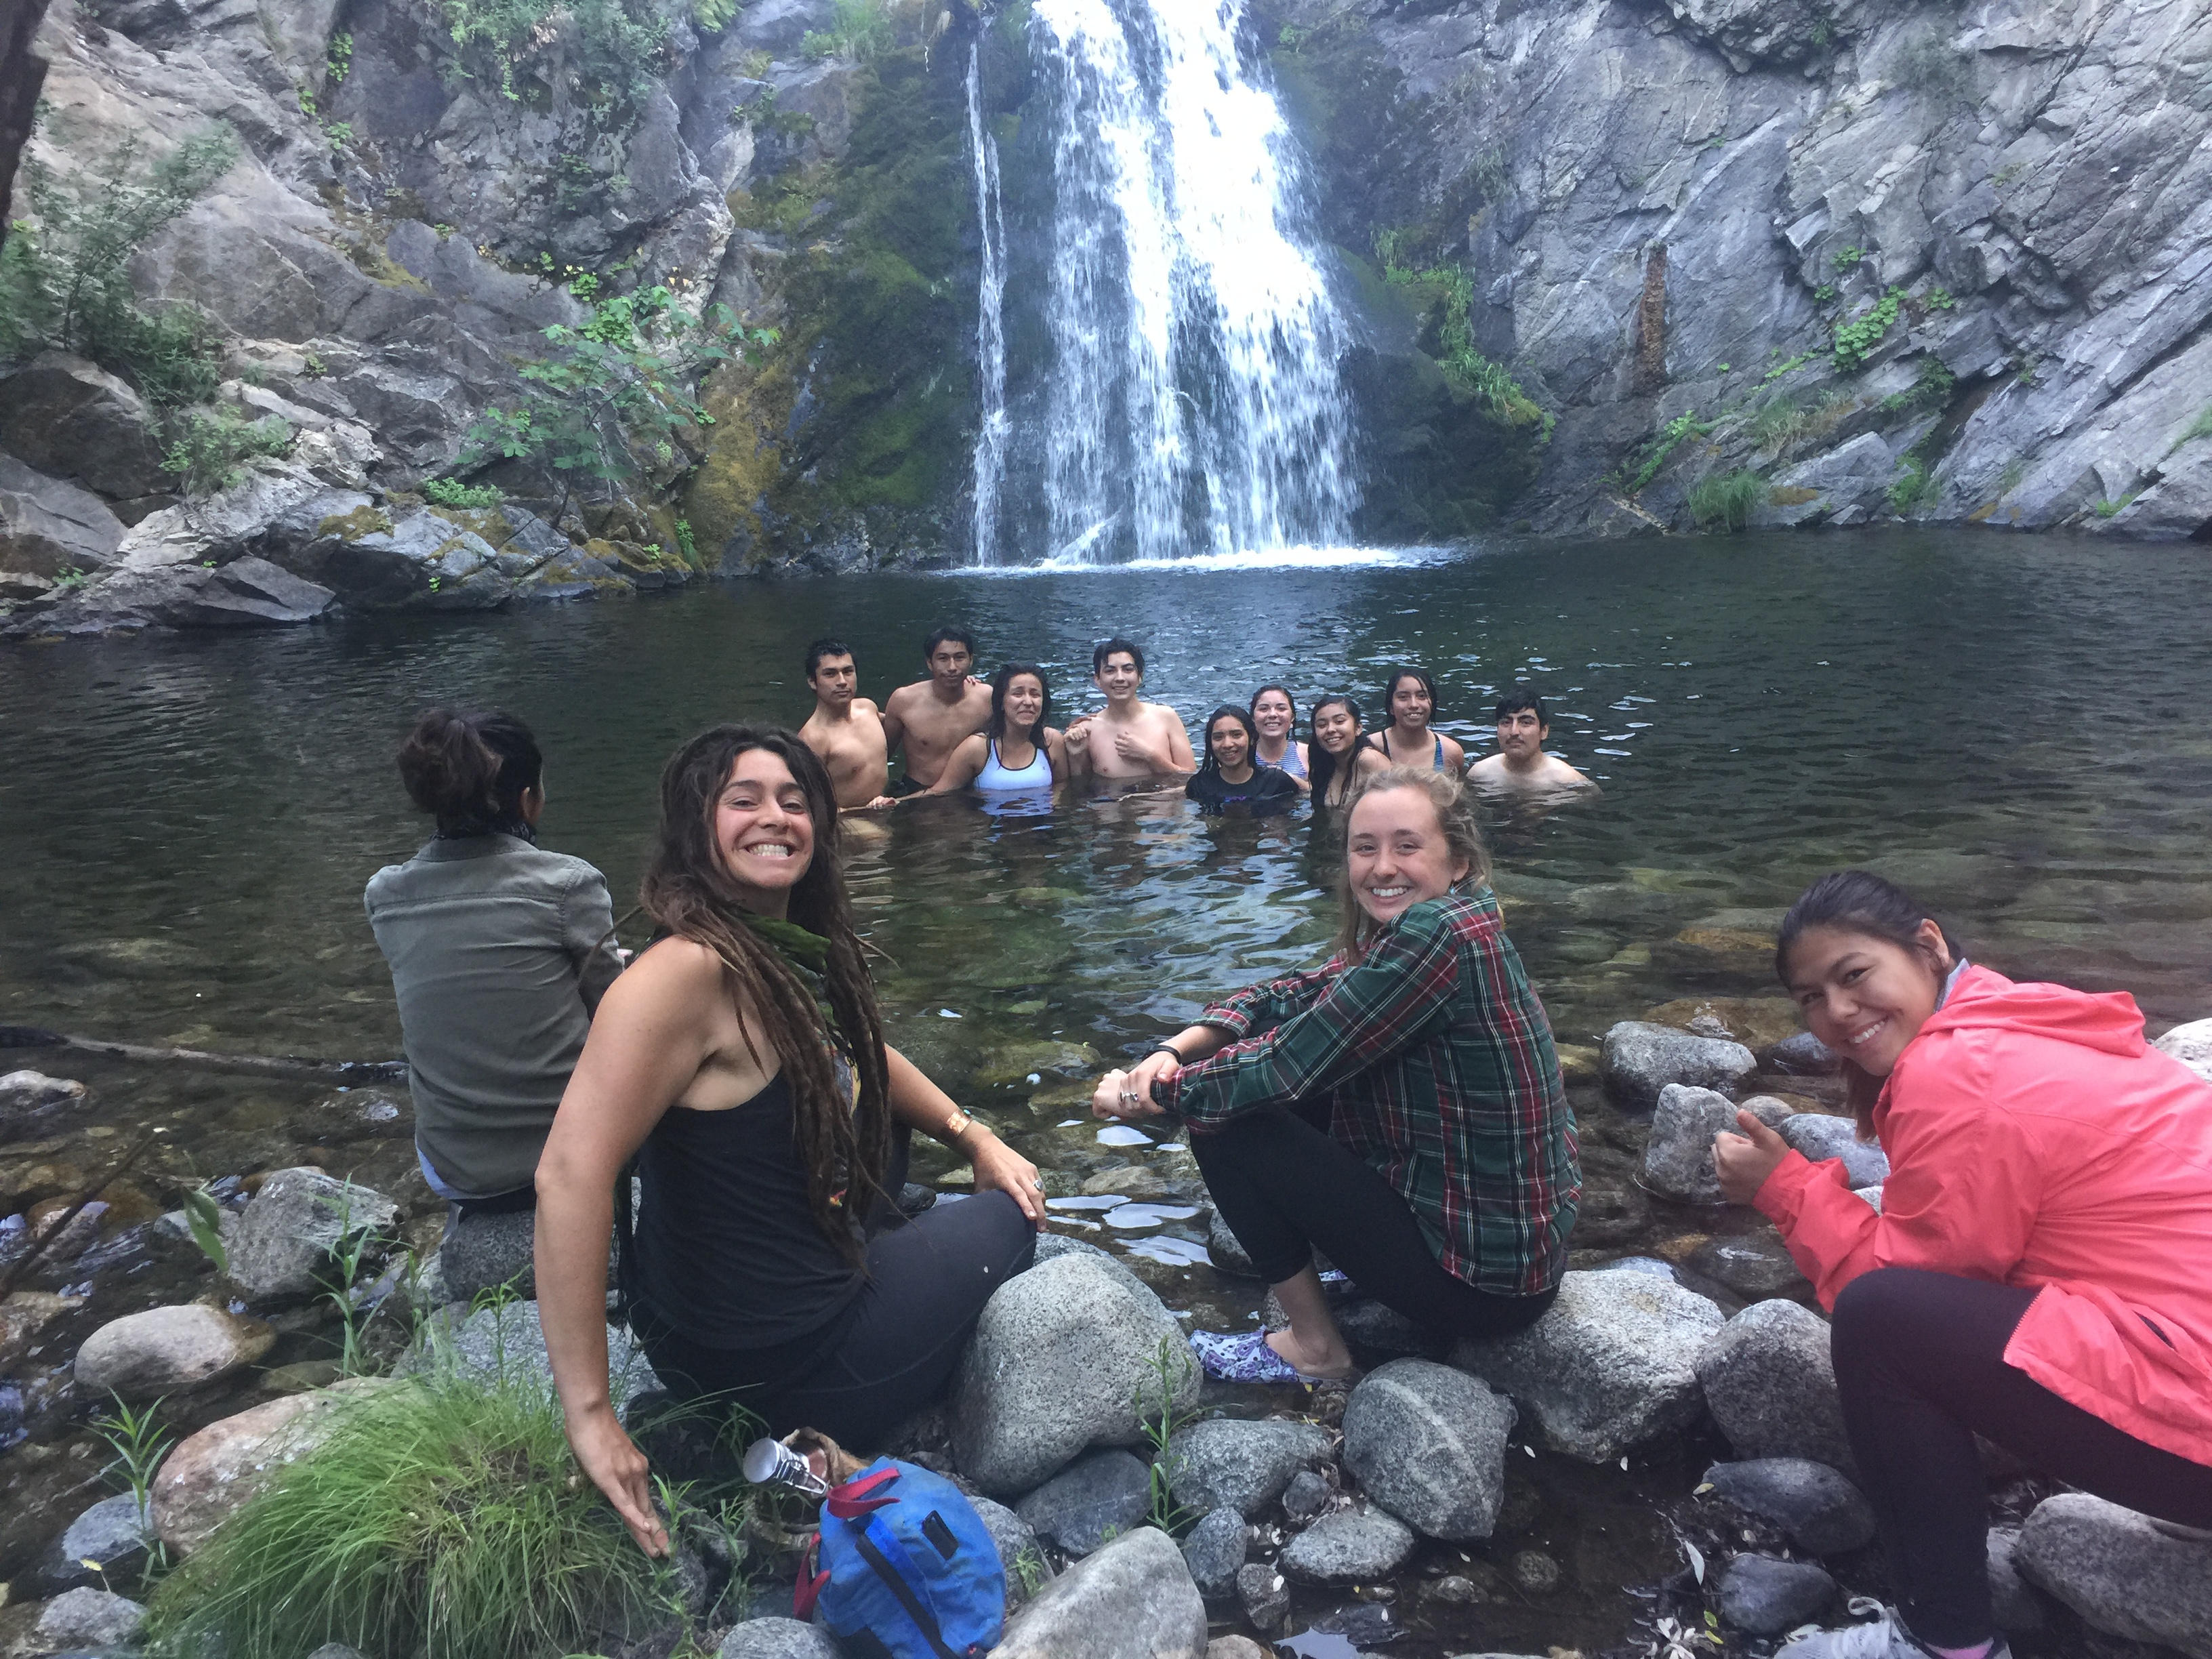 Camping in Arroyo Seco with the Ventanna Wilderness Society